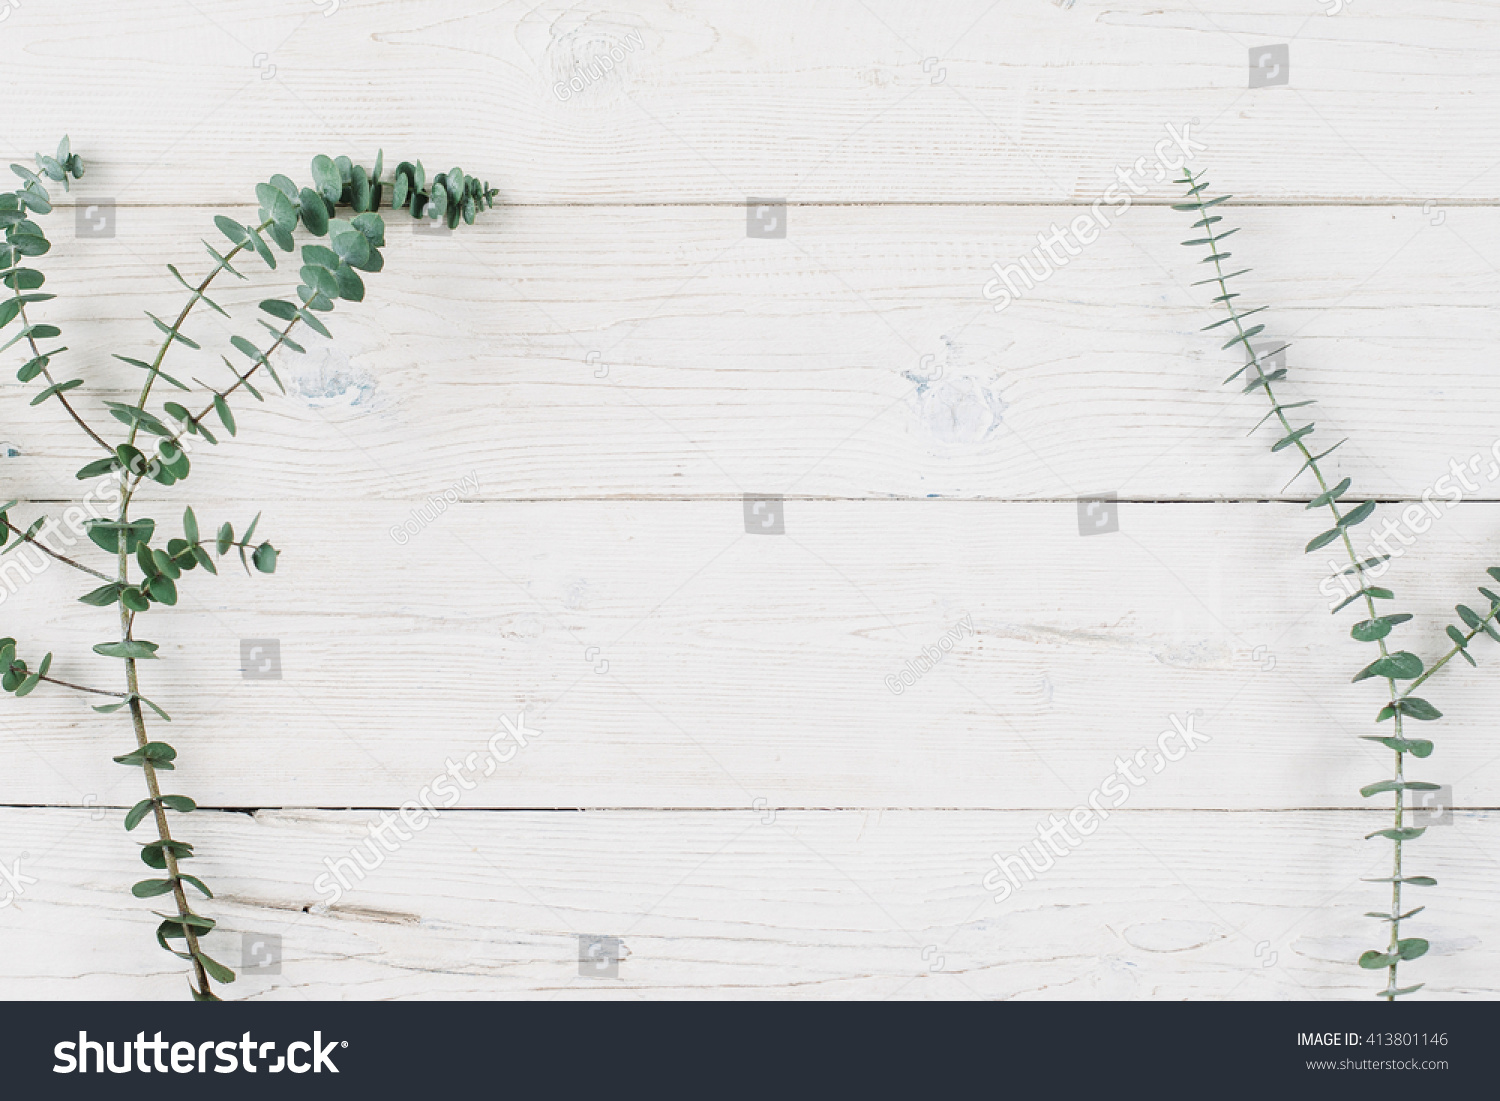 Spring plant over wood background. Decorative plant branch top view on white wooden background with free space. Rustic background with flat lay green plant. #413801146